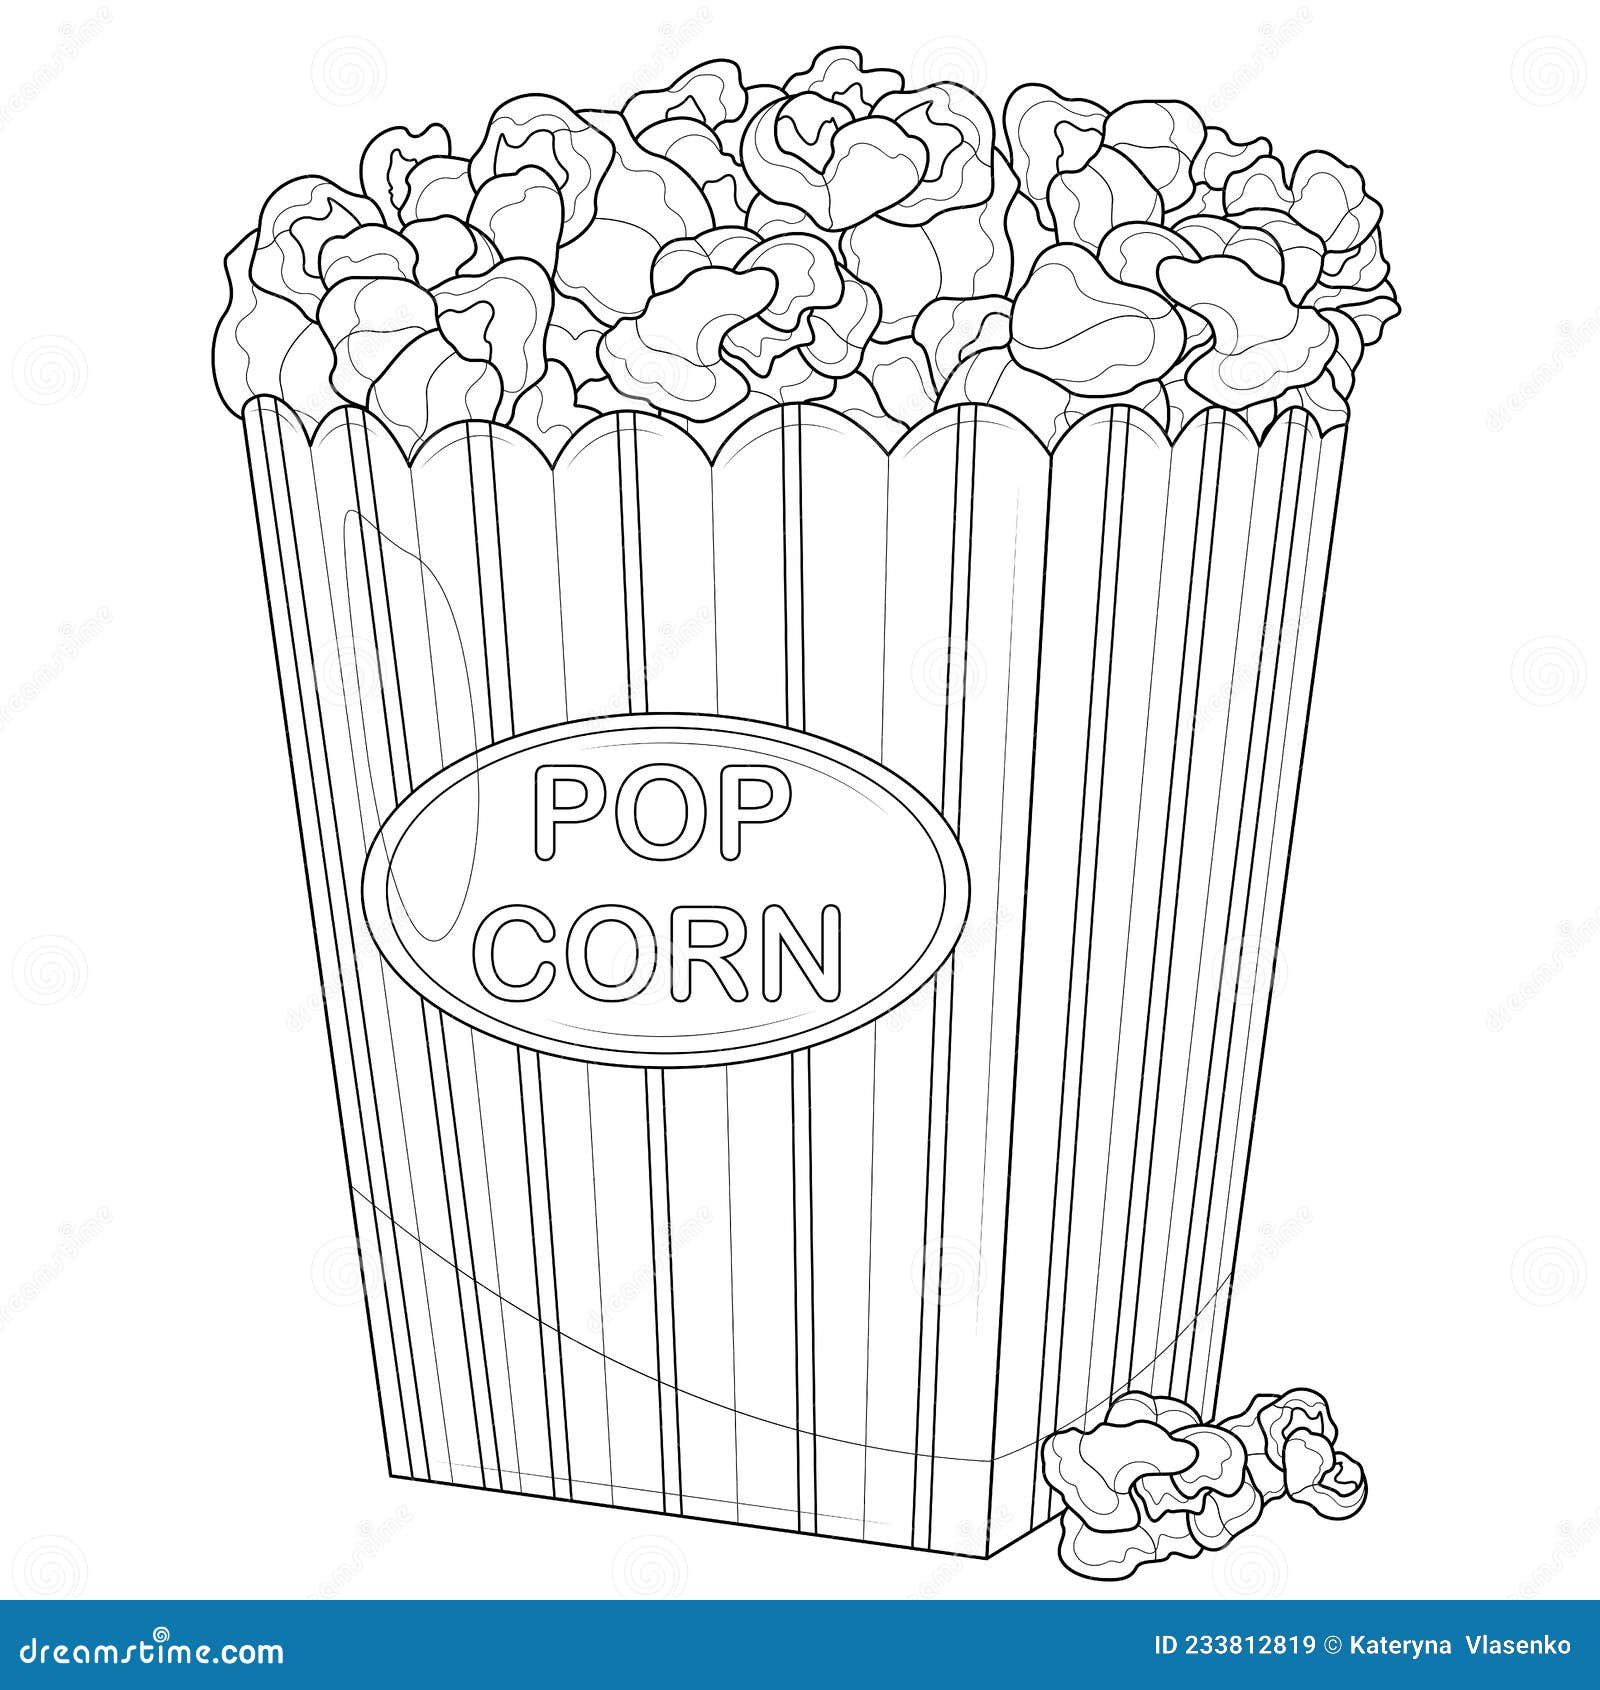 Popcorn in a boxcoloring book antistress for children and adults illustration isolated on white background stock vector